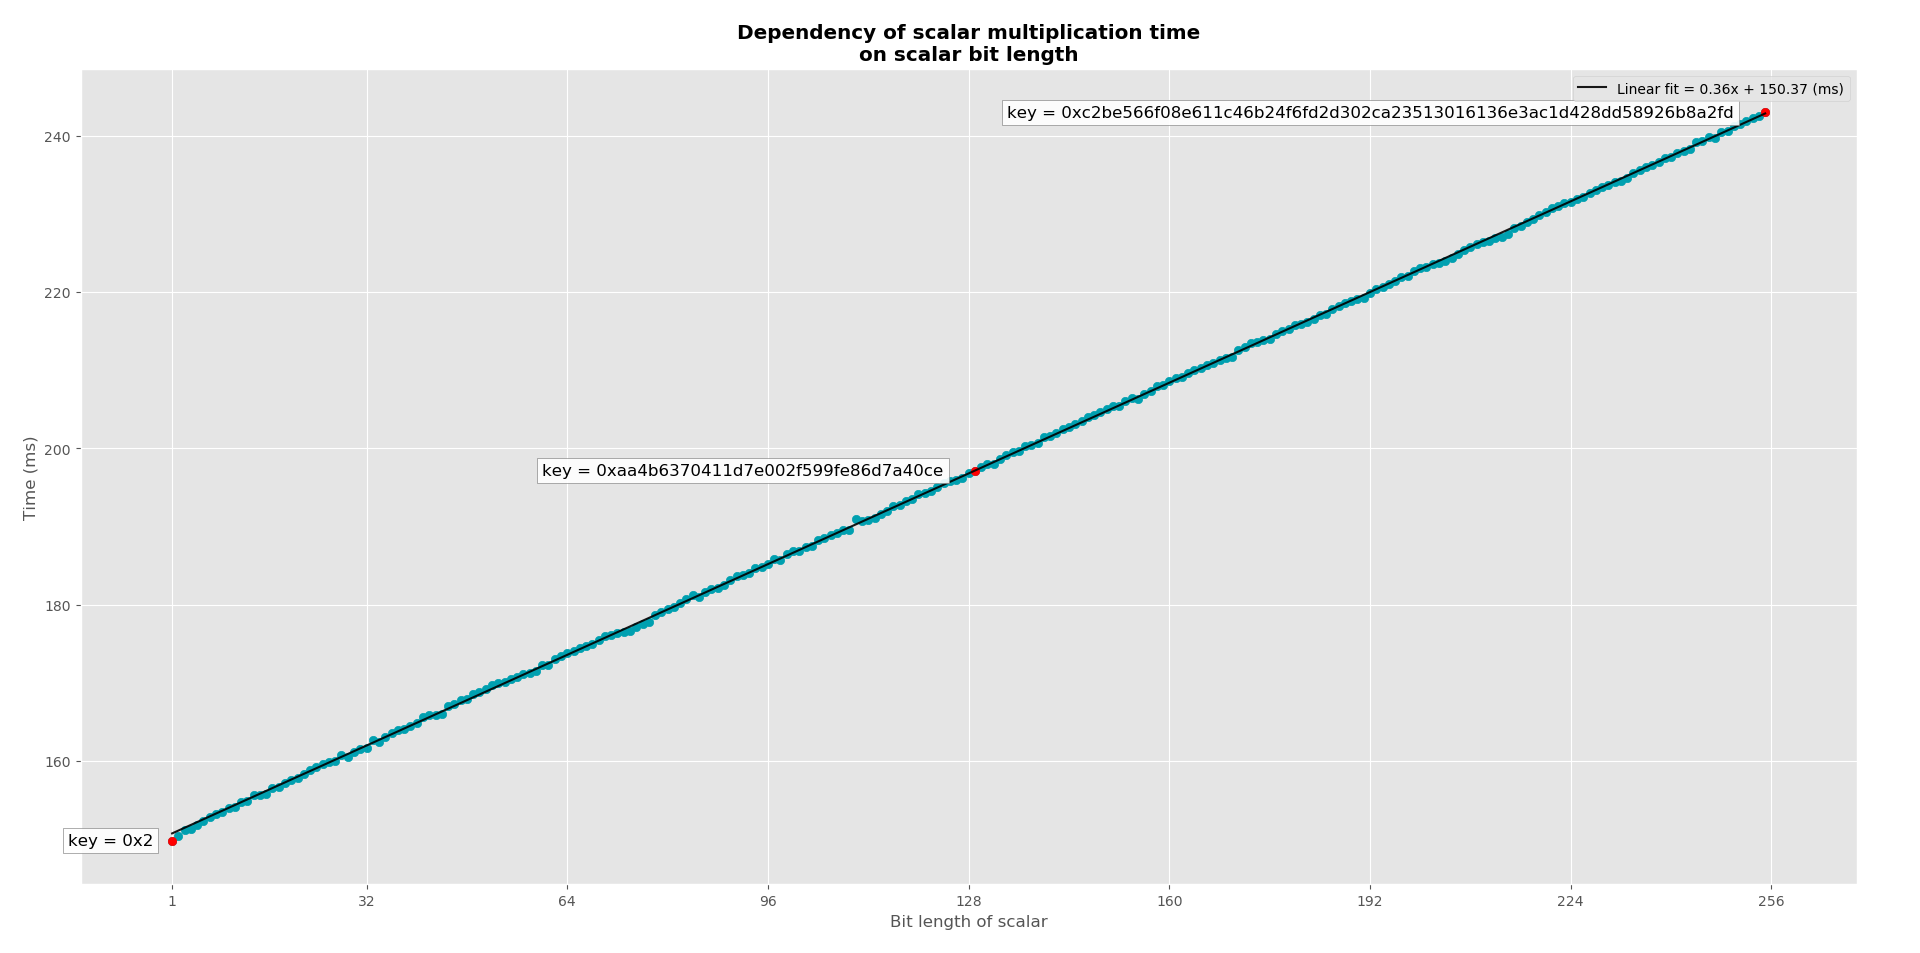 Plot of private key bit-length and scalar multiplication time.